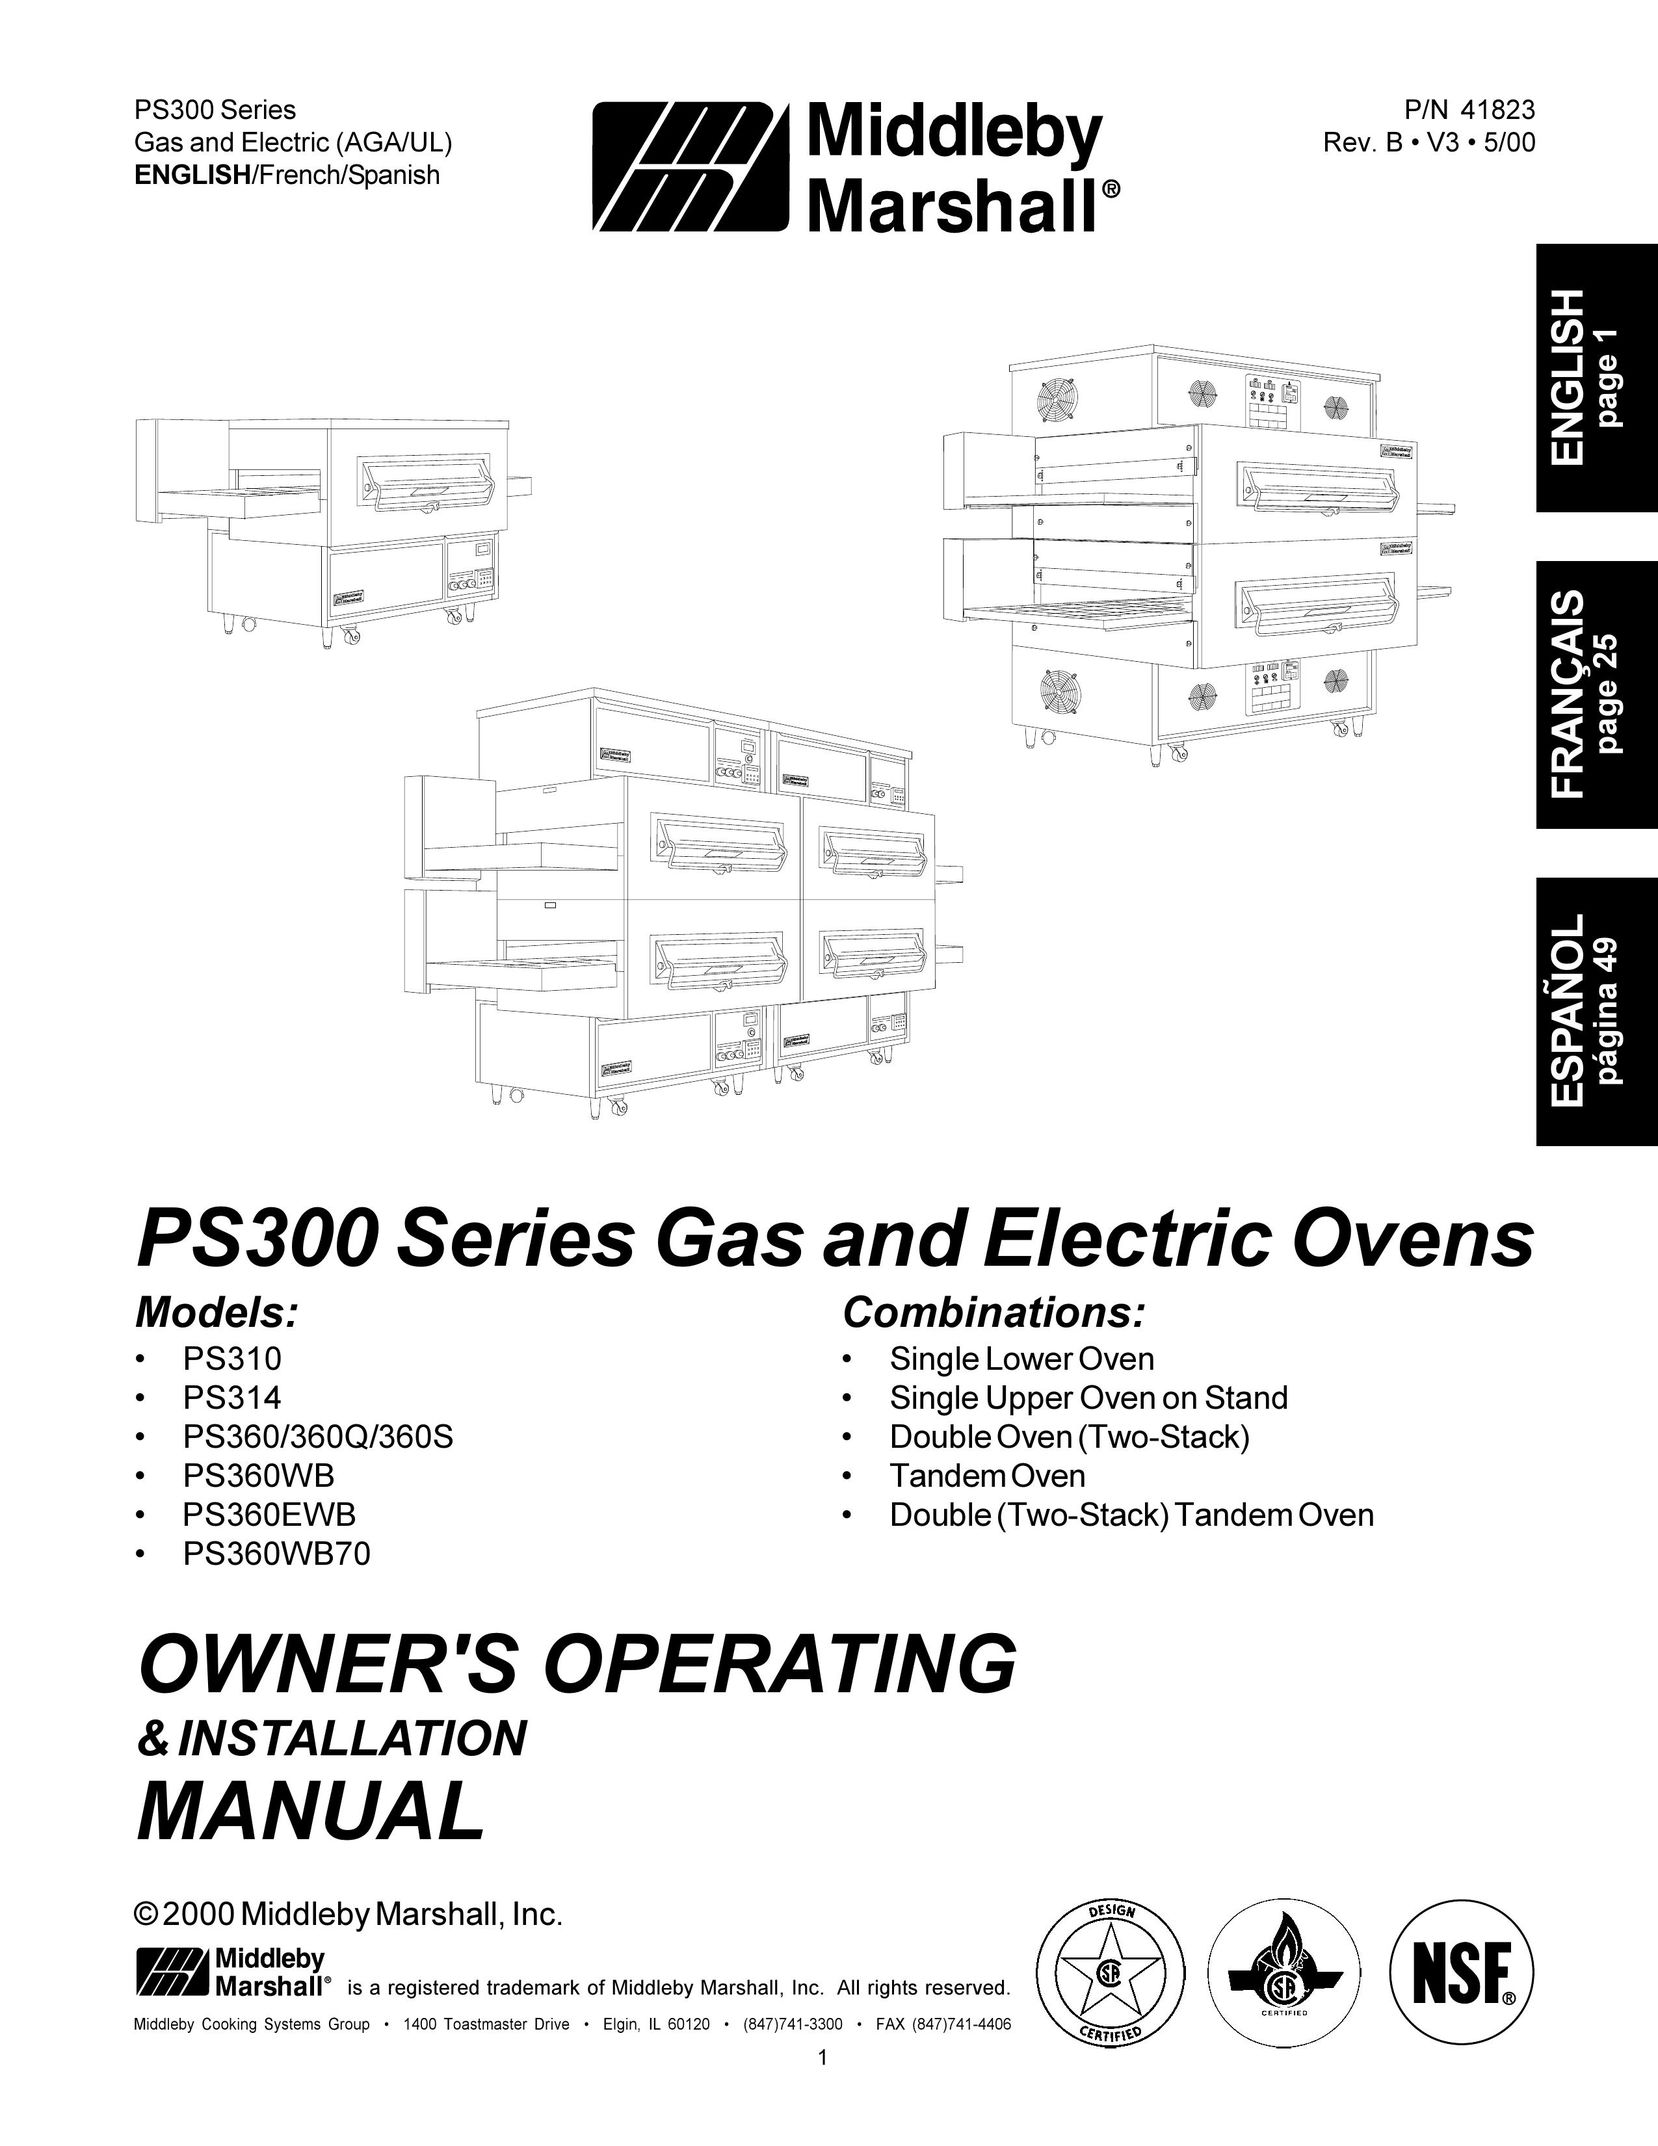 Middleby Marshall PS360 Oven User Manual